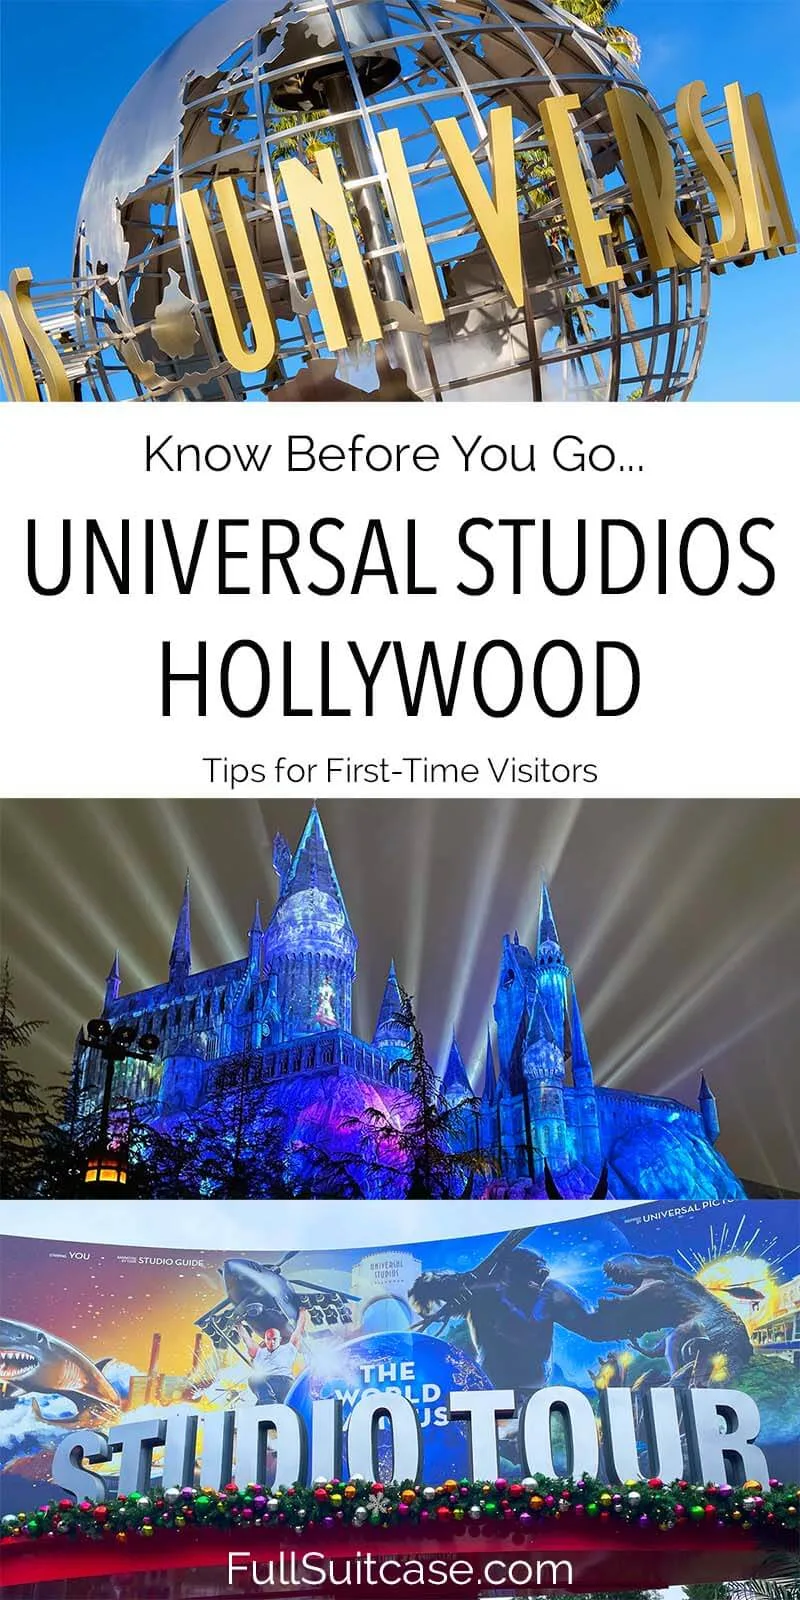 Universal Studios Hollywood tips and tricks for your first visit